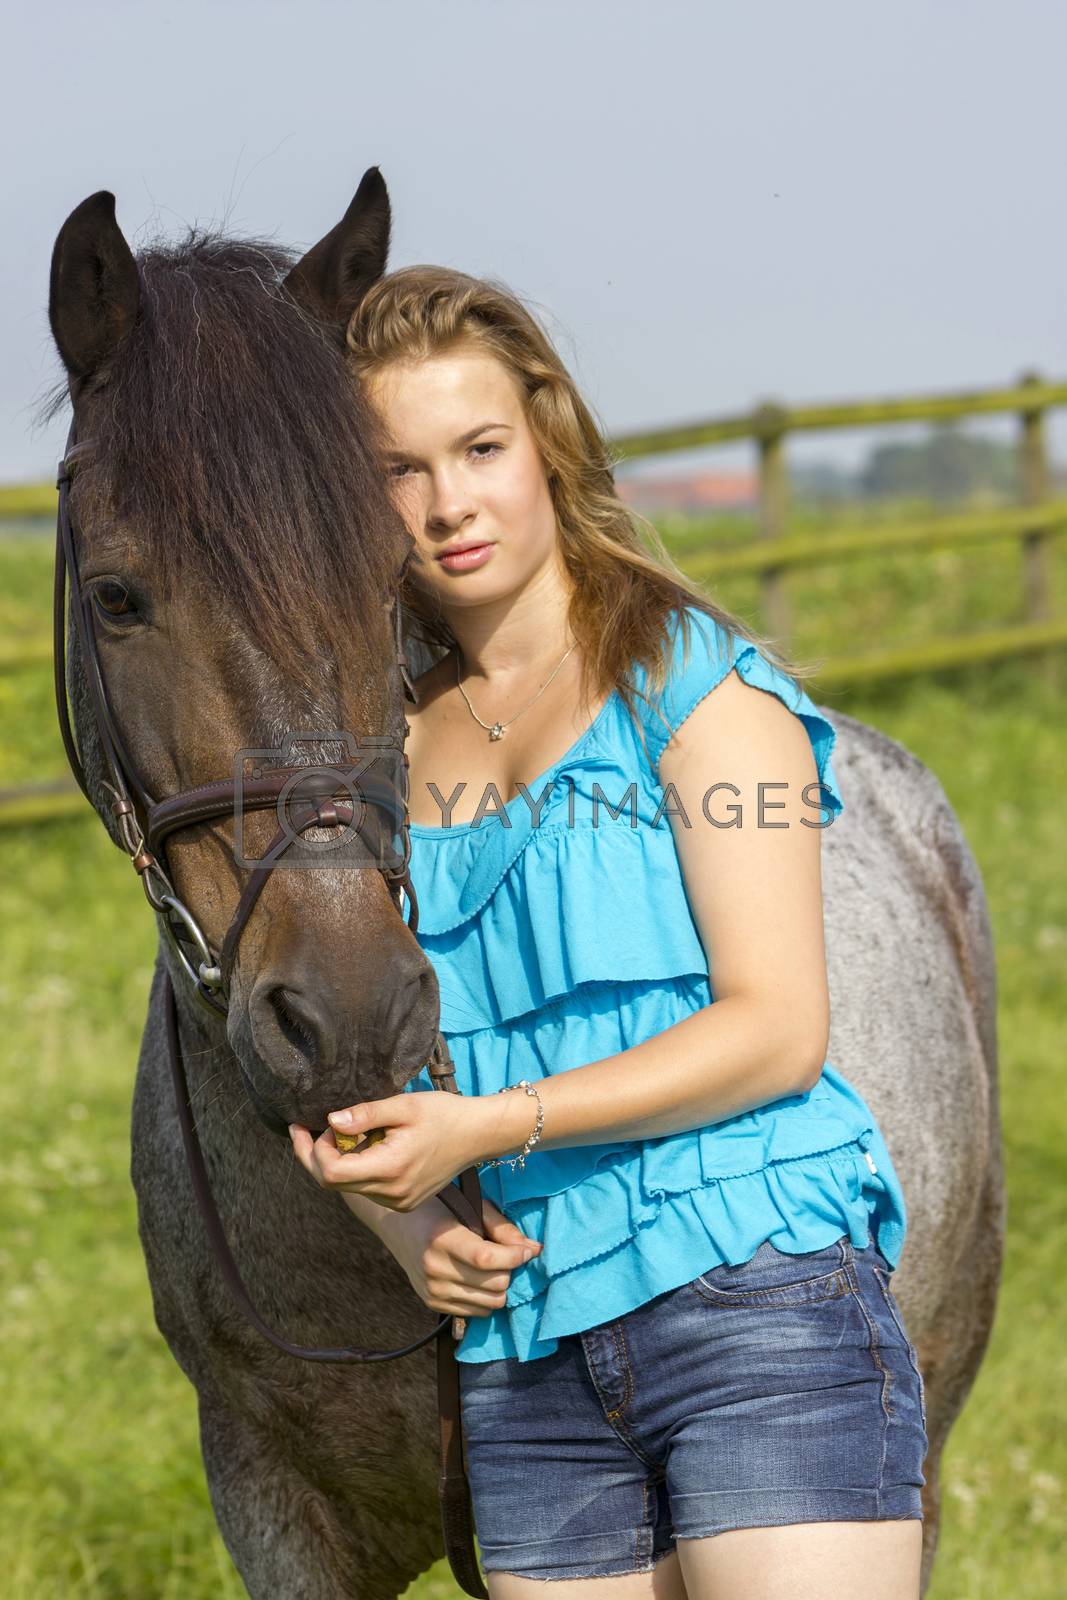 Royalty free image of young girl and her horse by miradrozdowski